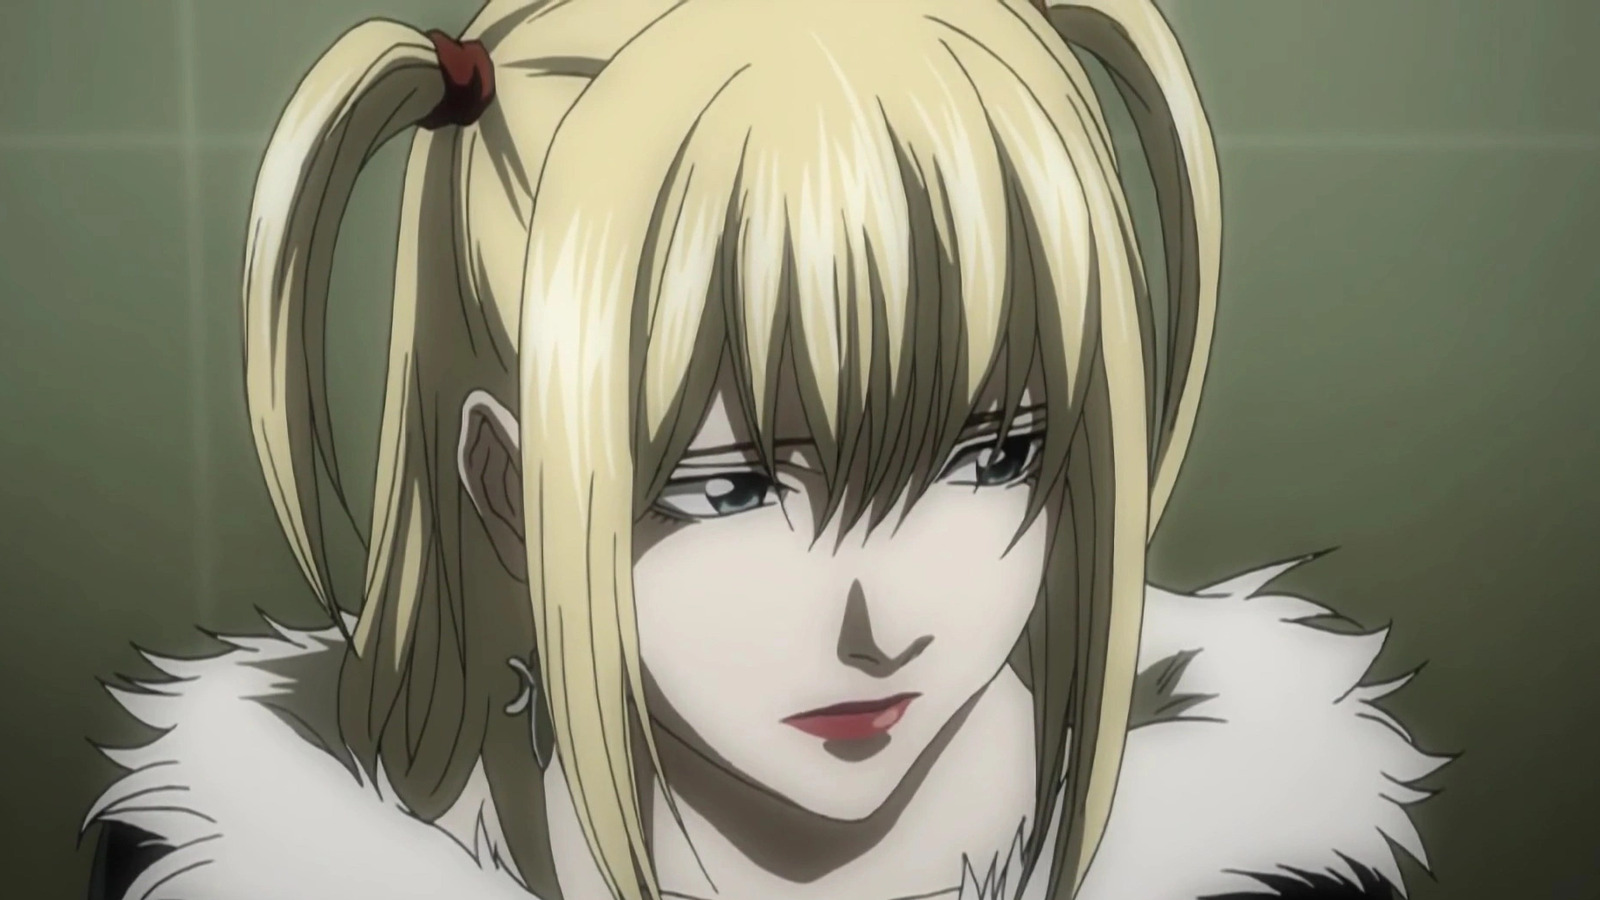 10 smartest characters in Death Note ranked based on their intelligence